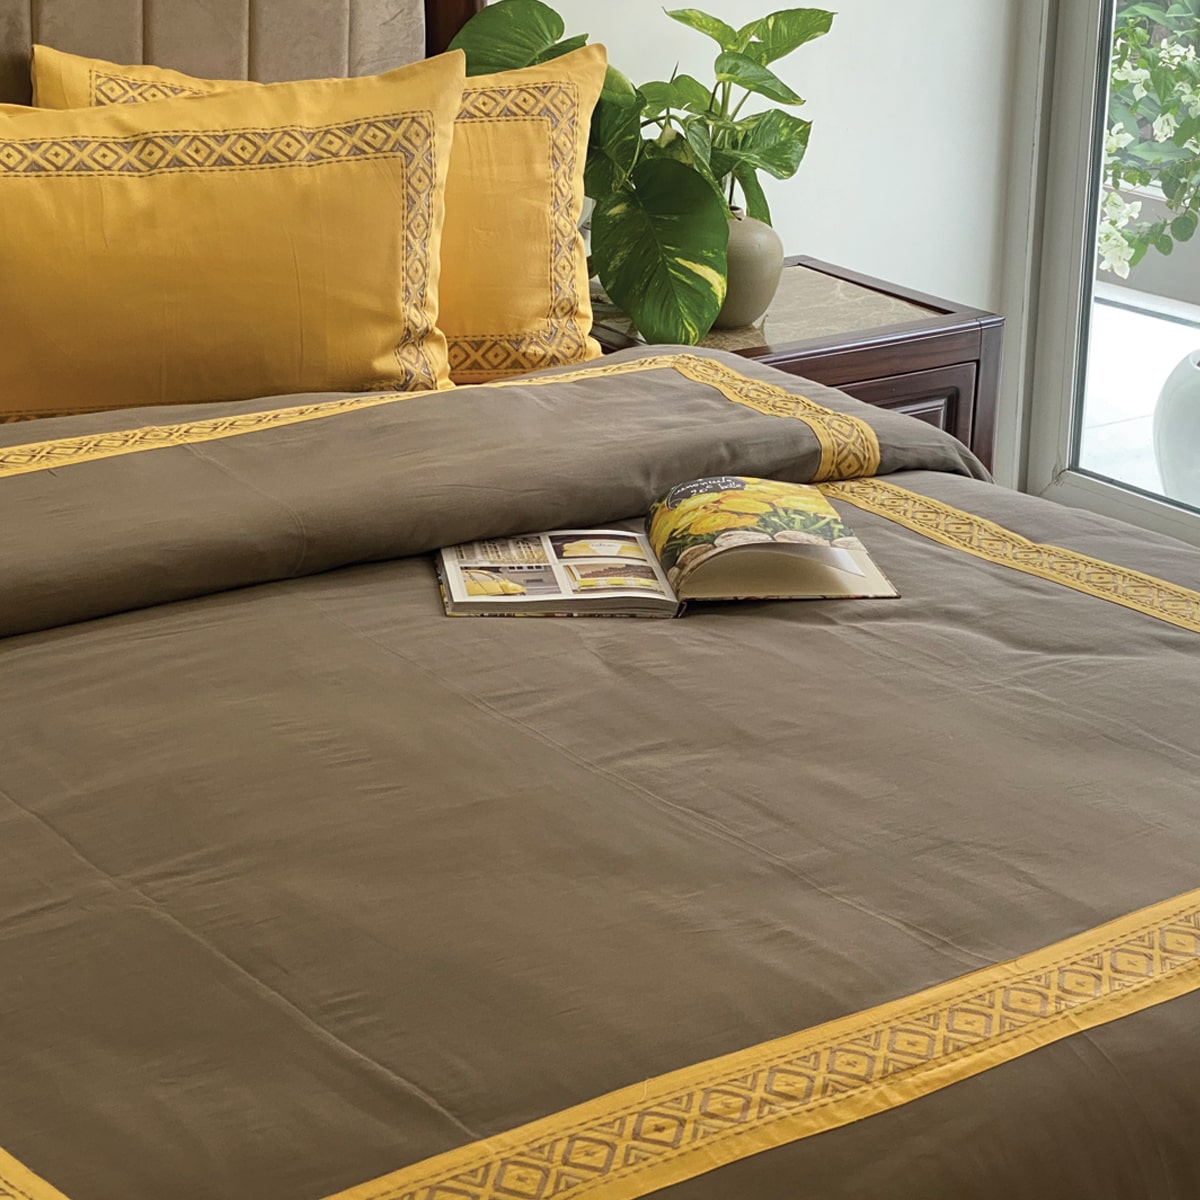 Prism Butter Cup Yellow and Olive Grey Dreams Duvet Cover